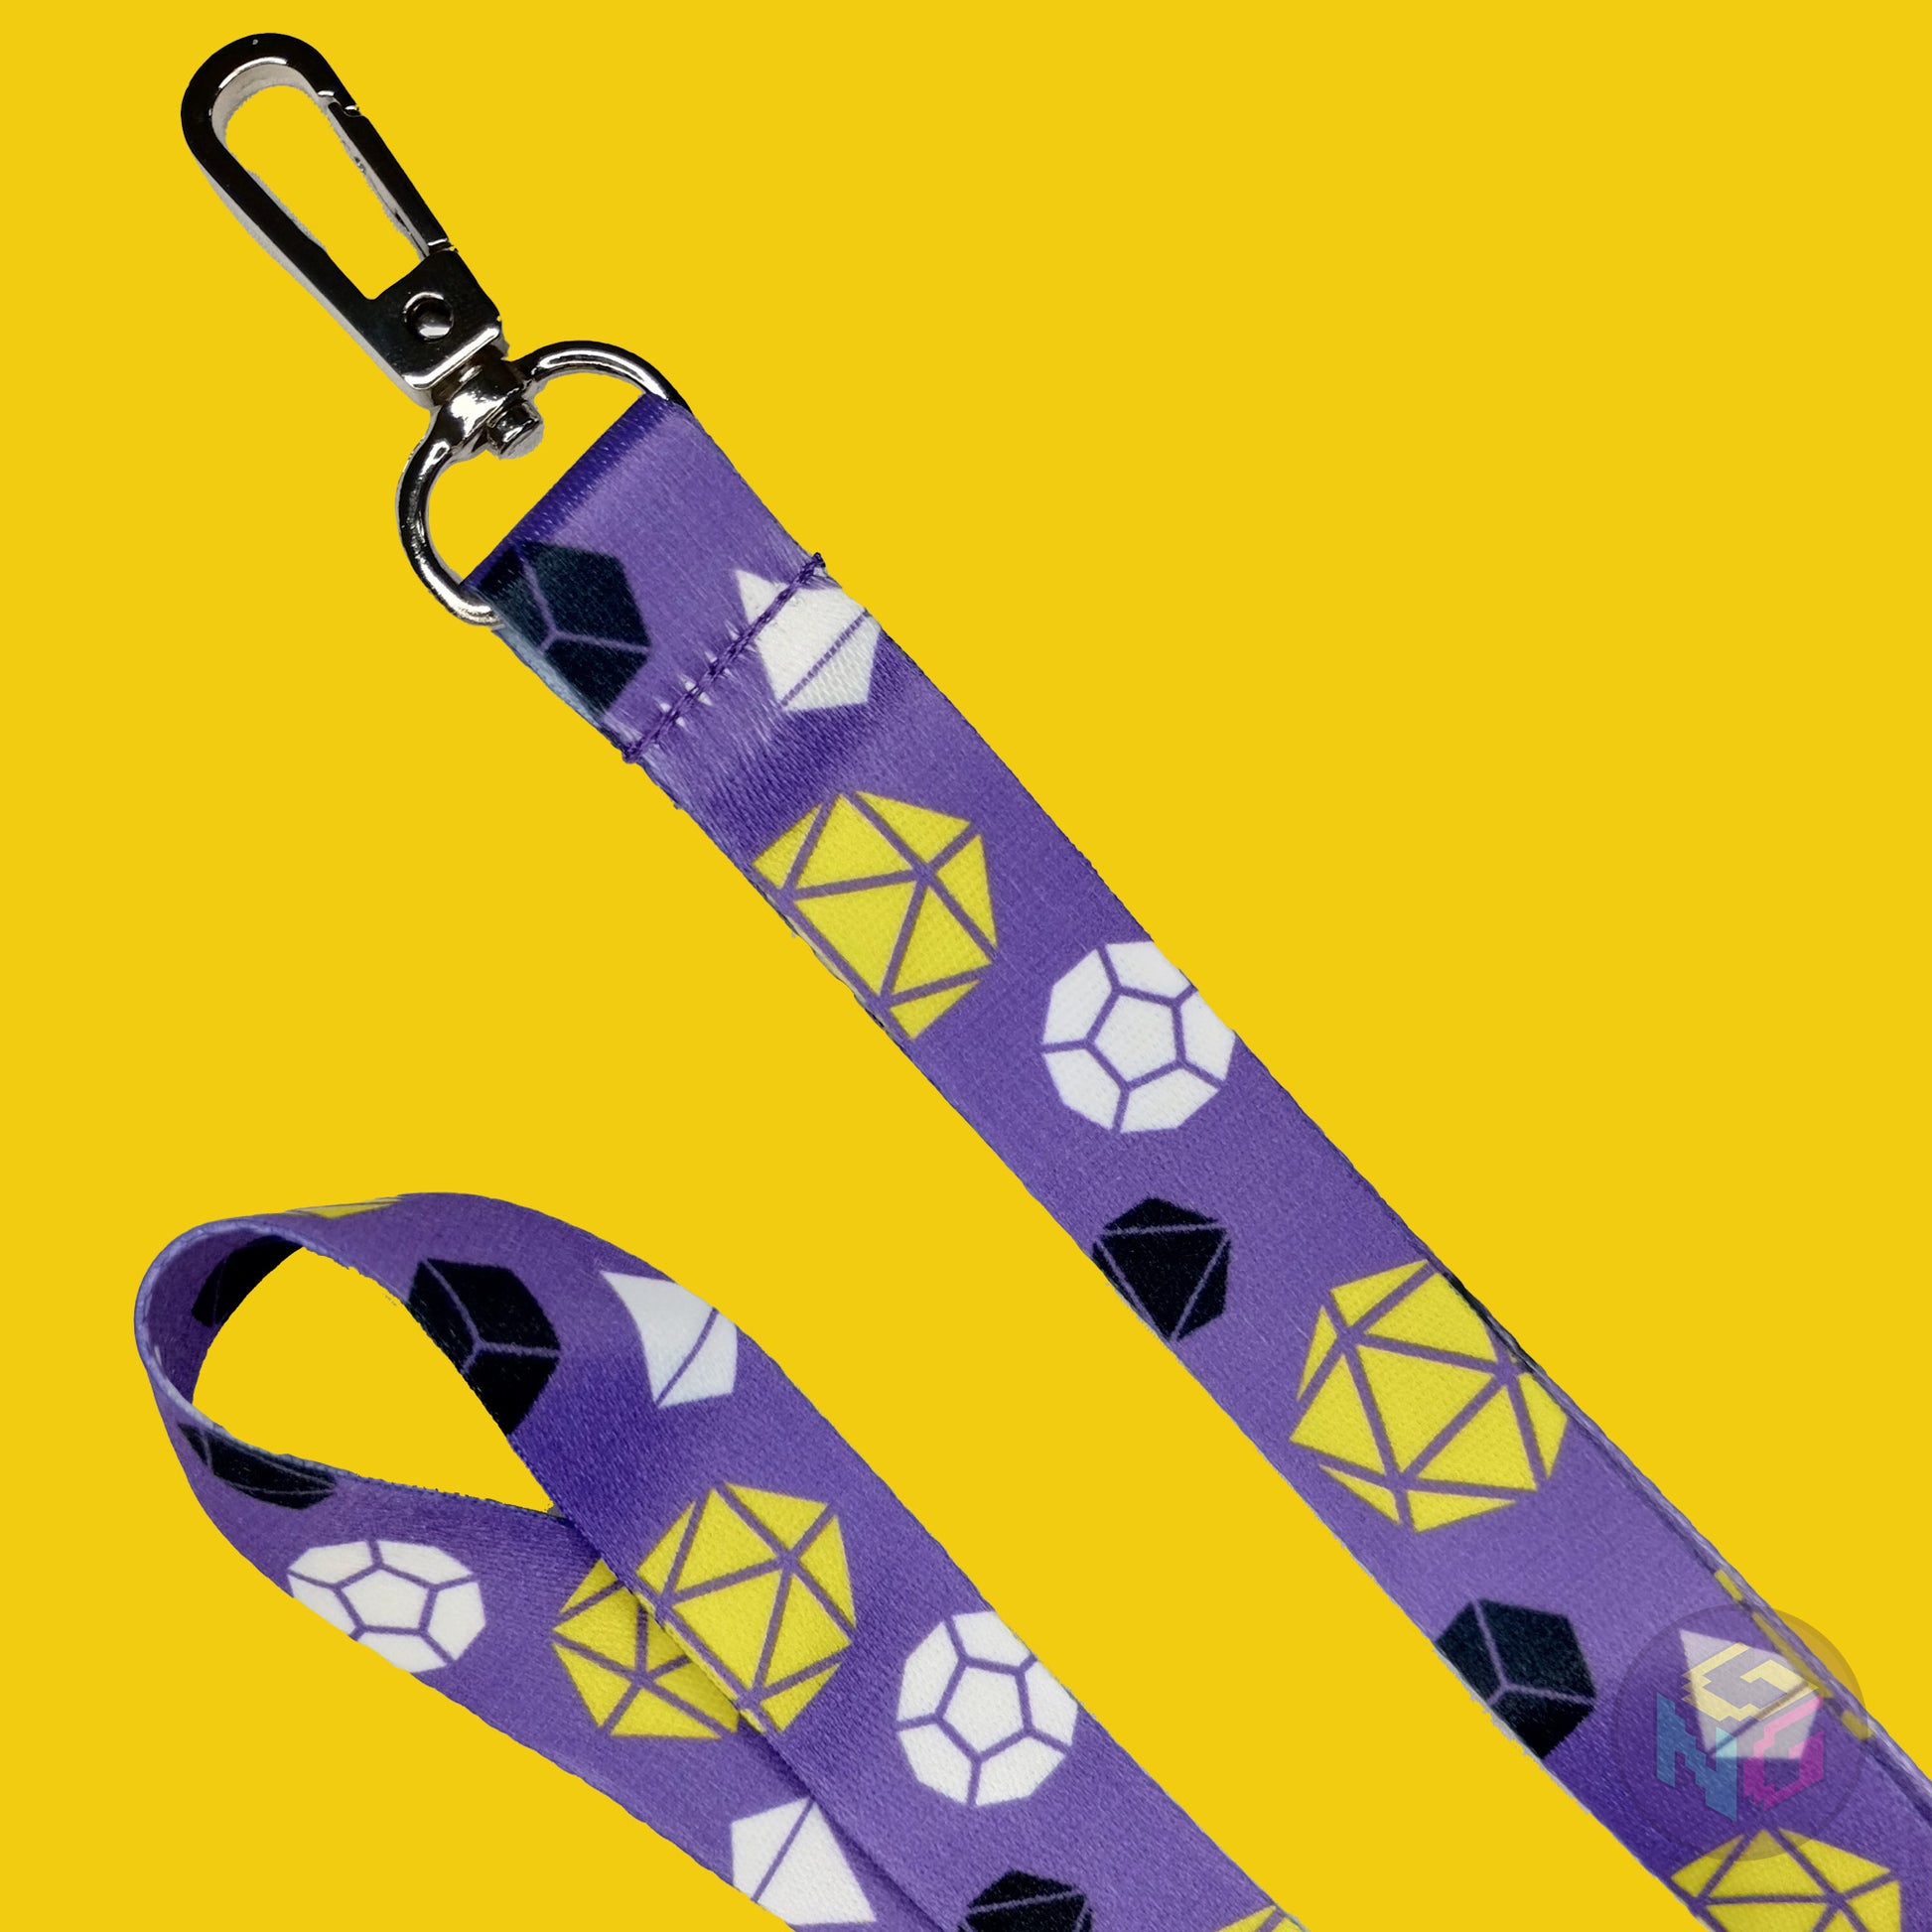 close up detail of the nonbinary dungeons and dragons lanyard showing the lobster clasp, yellow d20s, black d6s, white d4s, and other dice